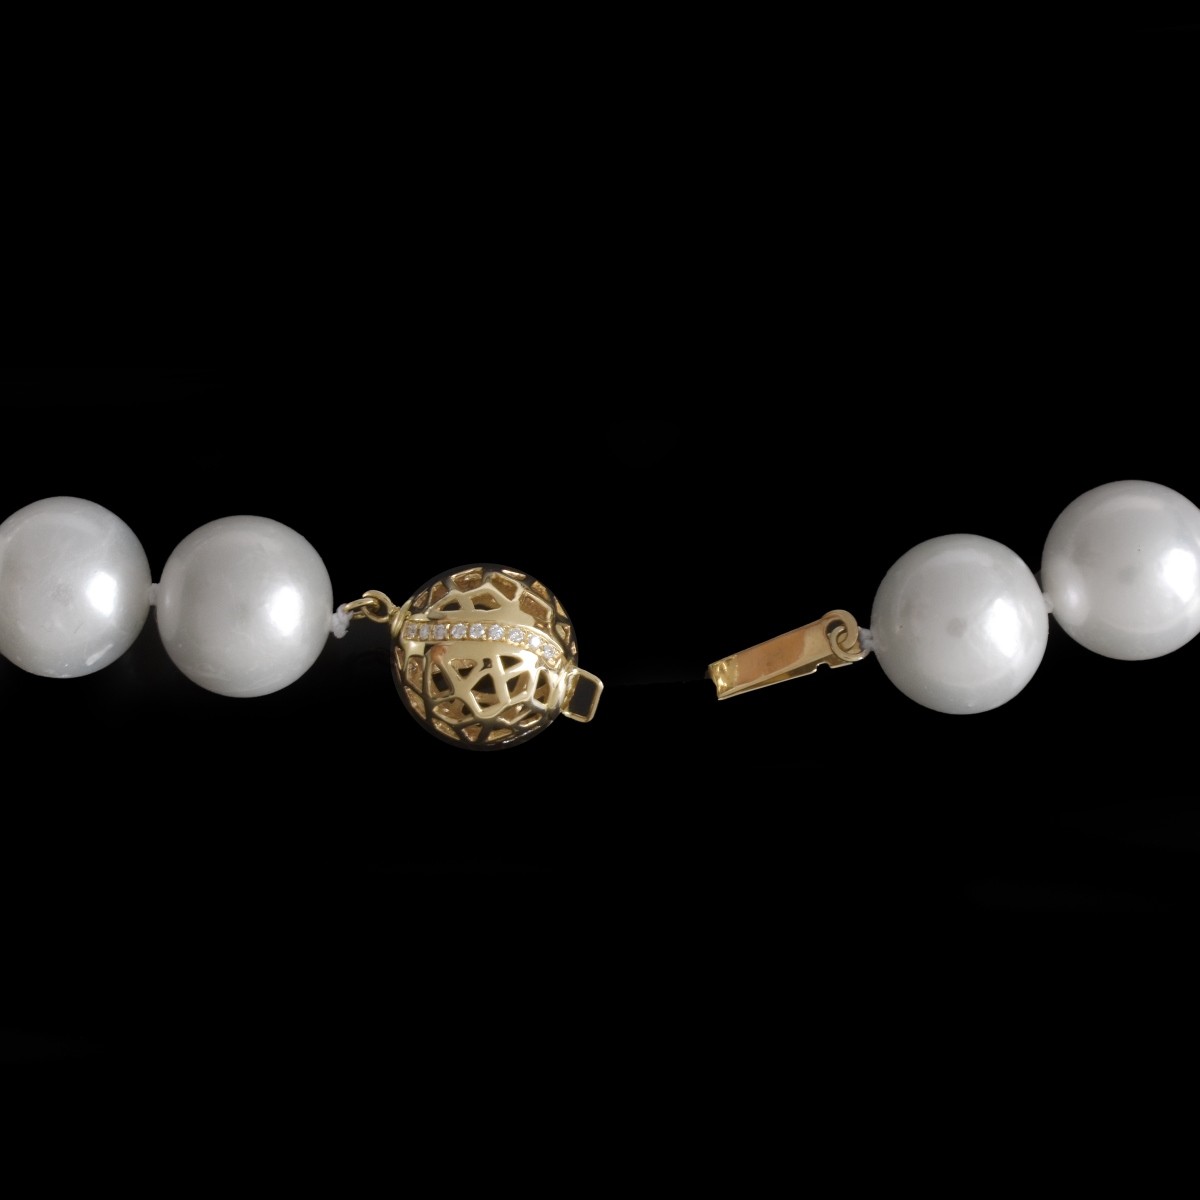 South Sea Pearl Necklace